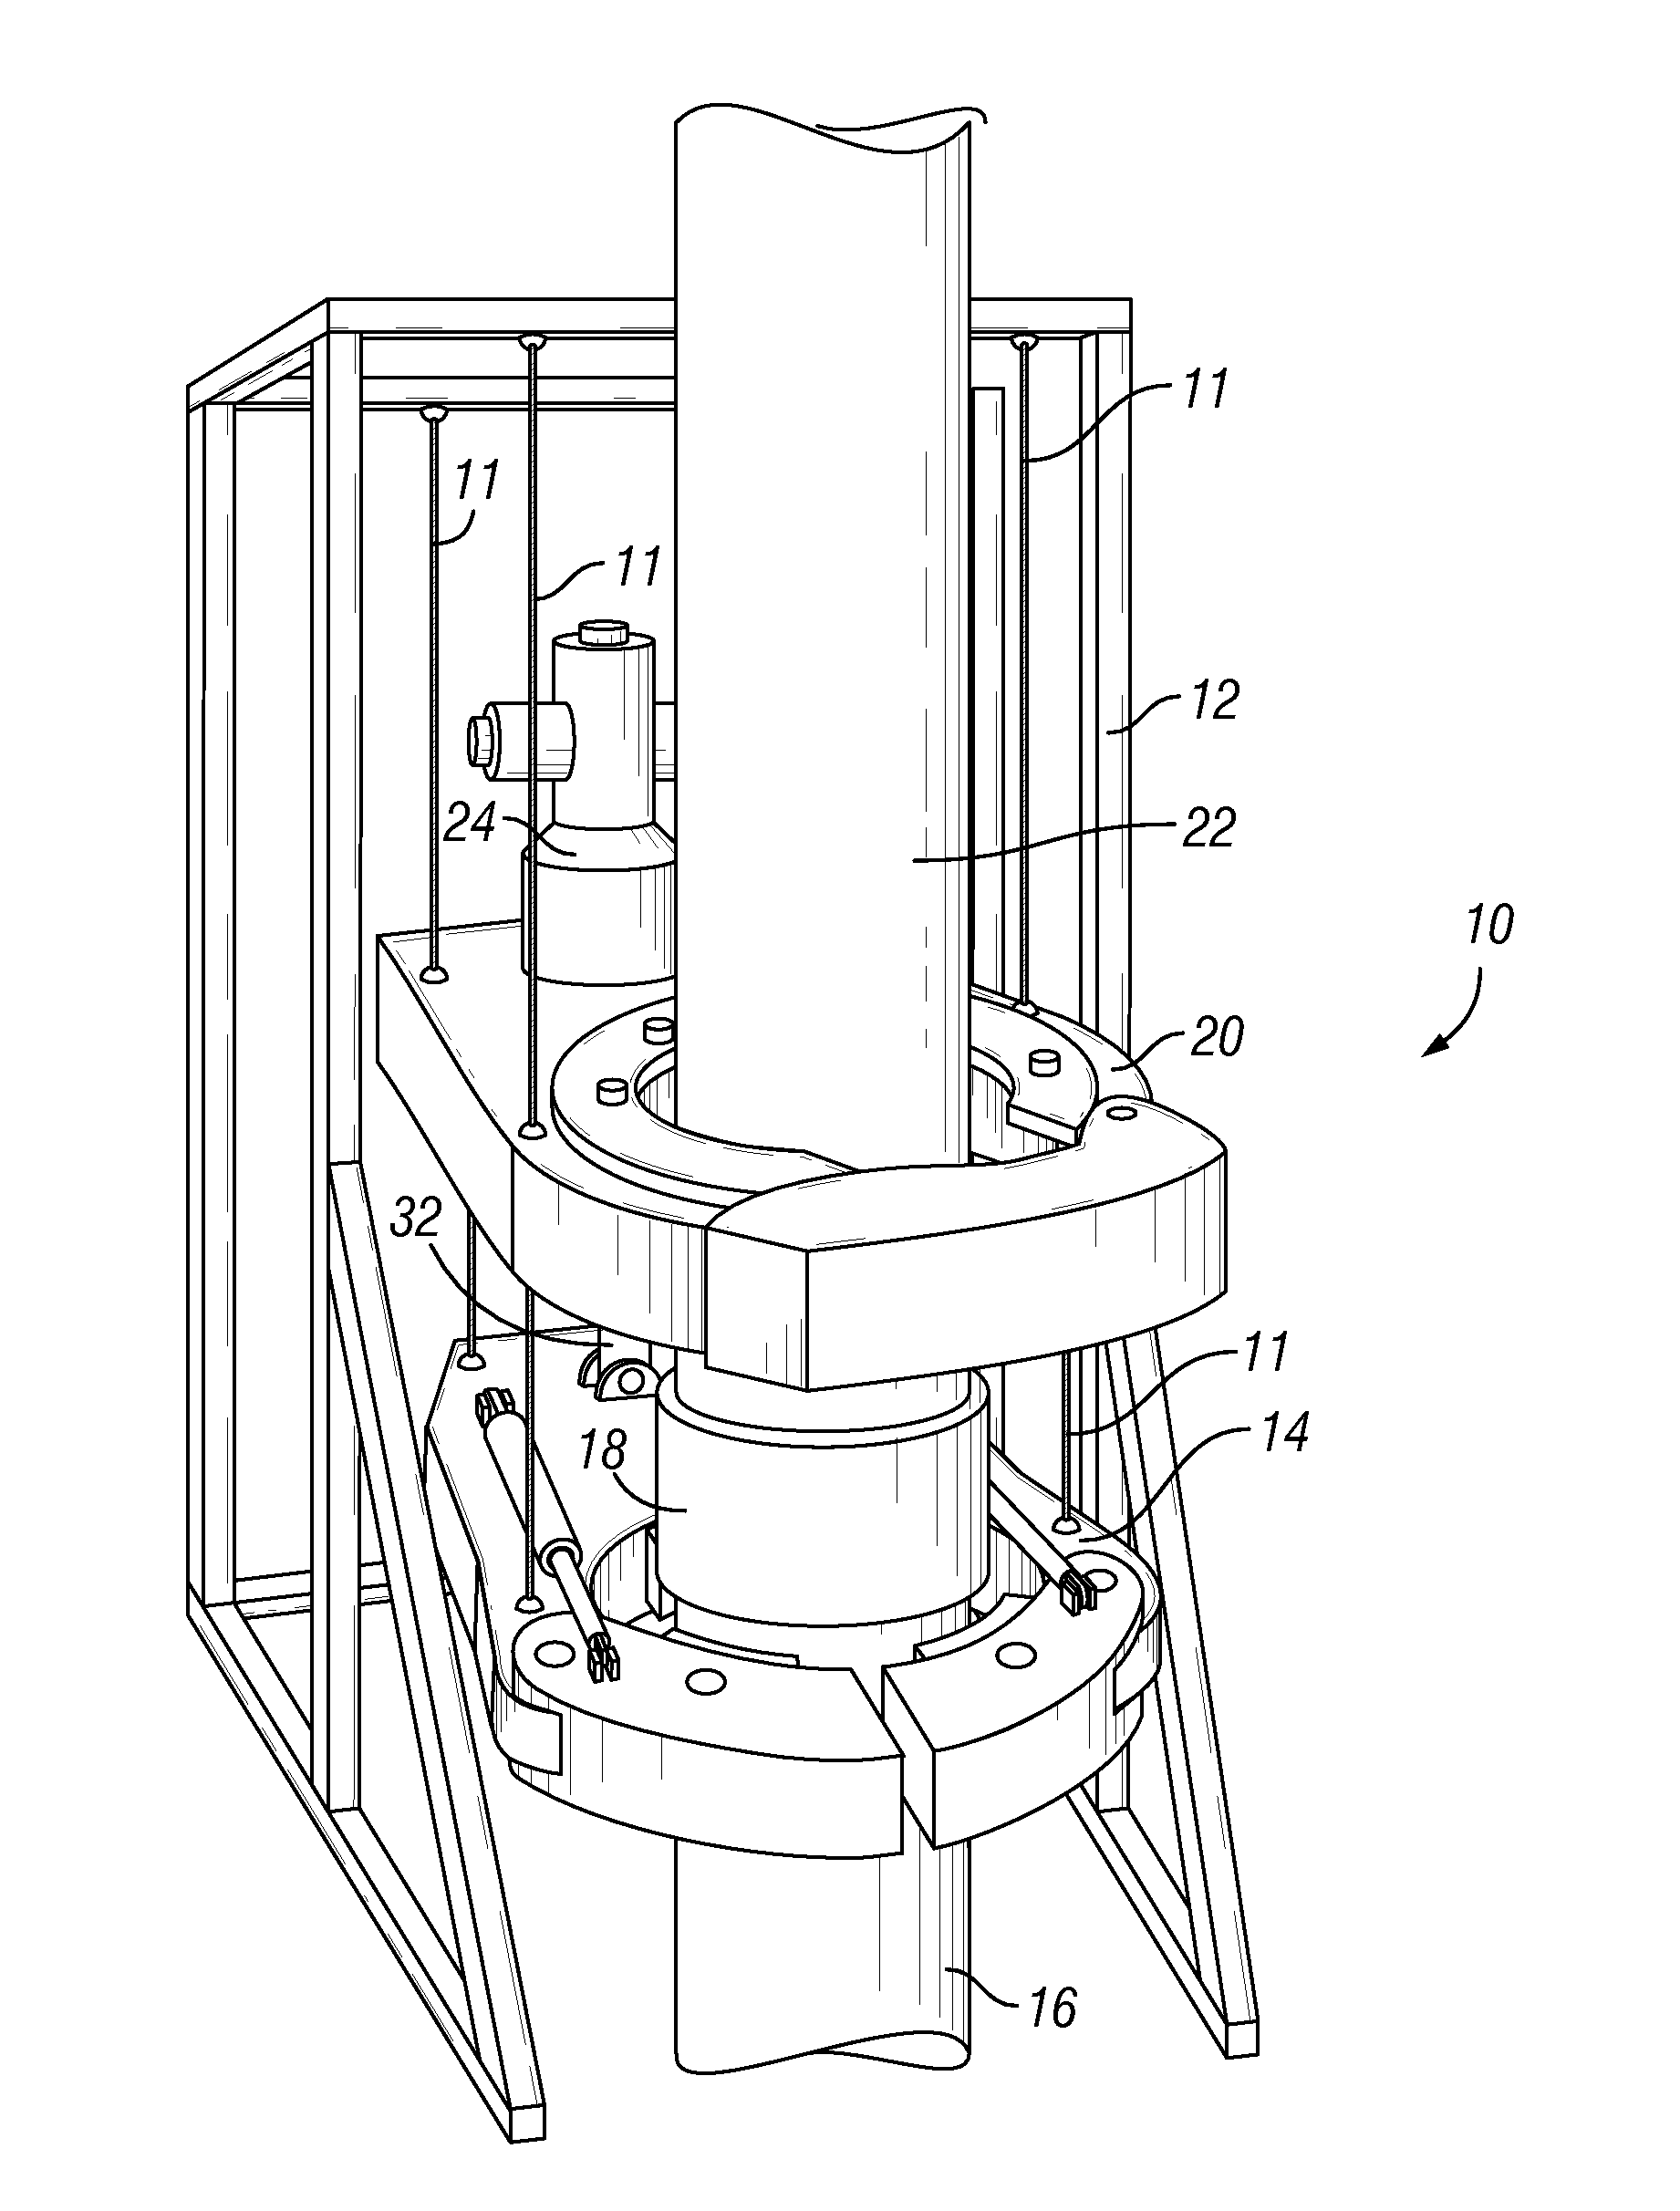 Slippage Sensor and Method of Operating an Integrated Power Tong and Back-Up Tong